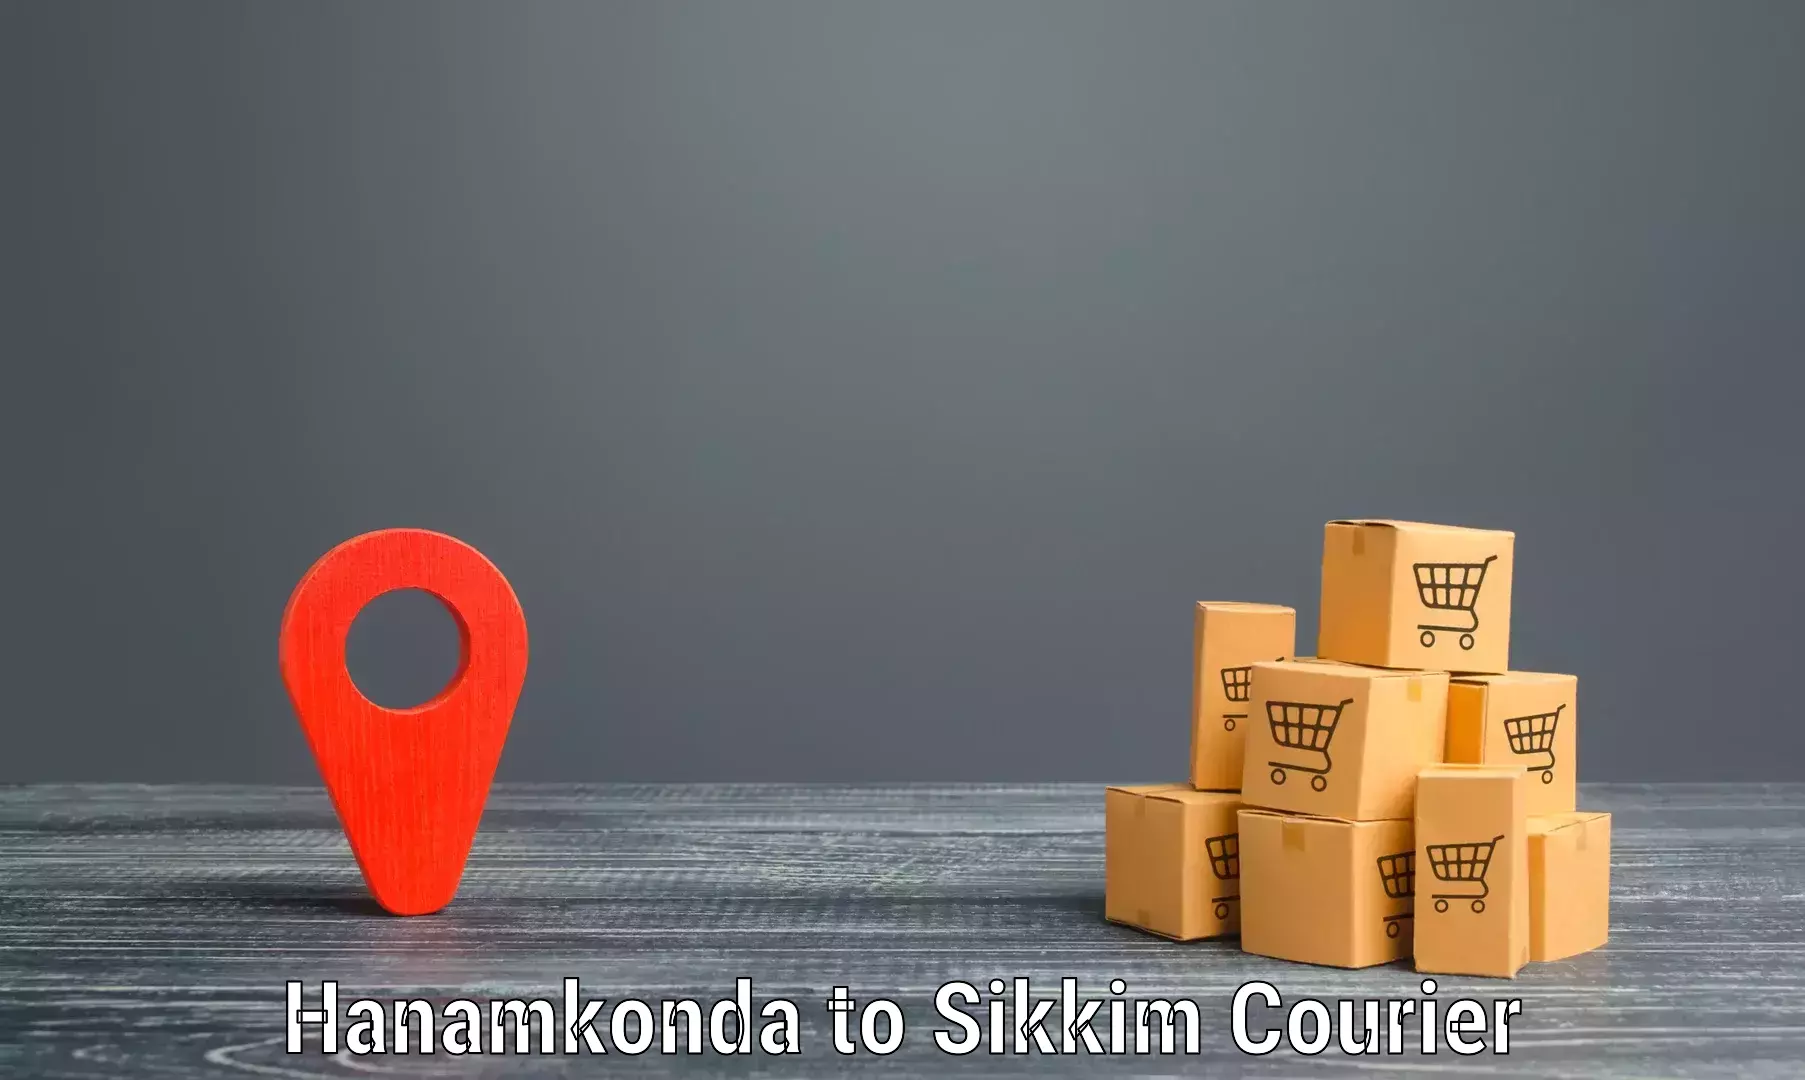 Reliable delivery network Hanamkonda to Pelling